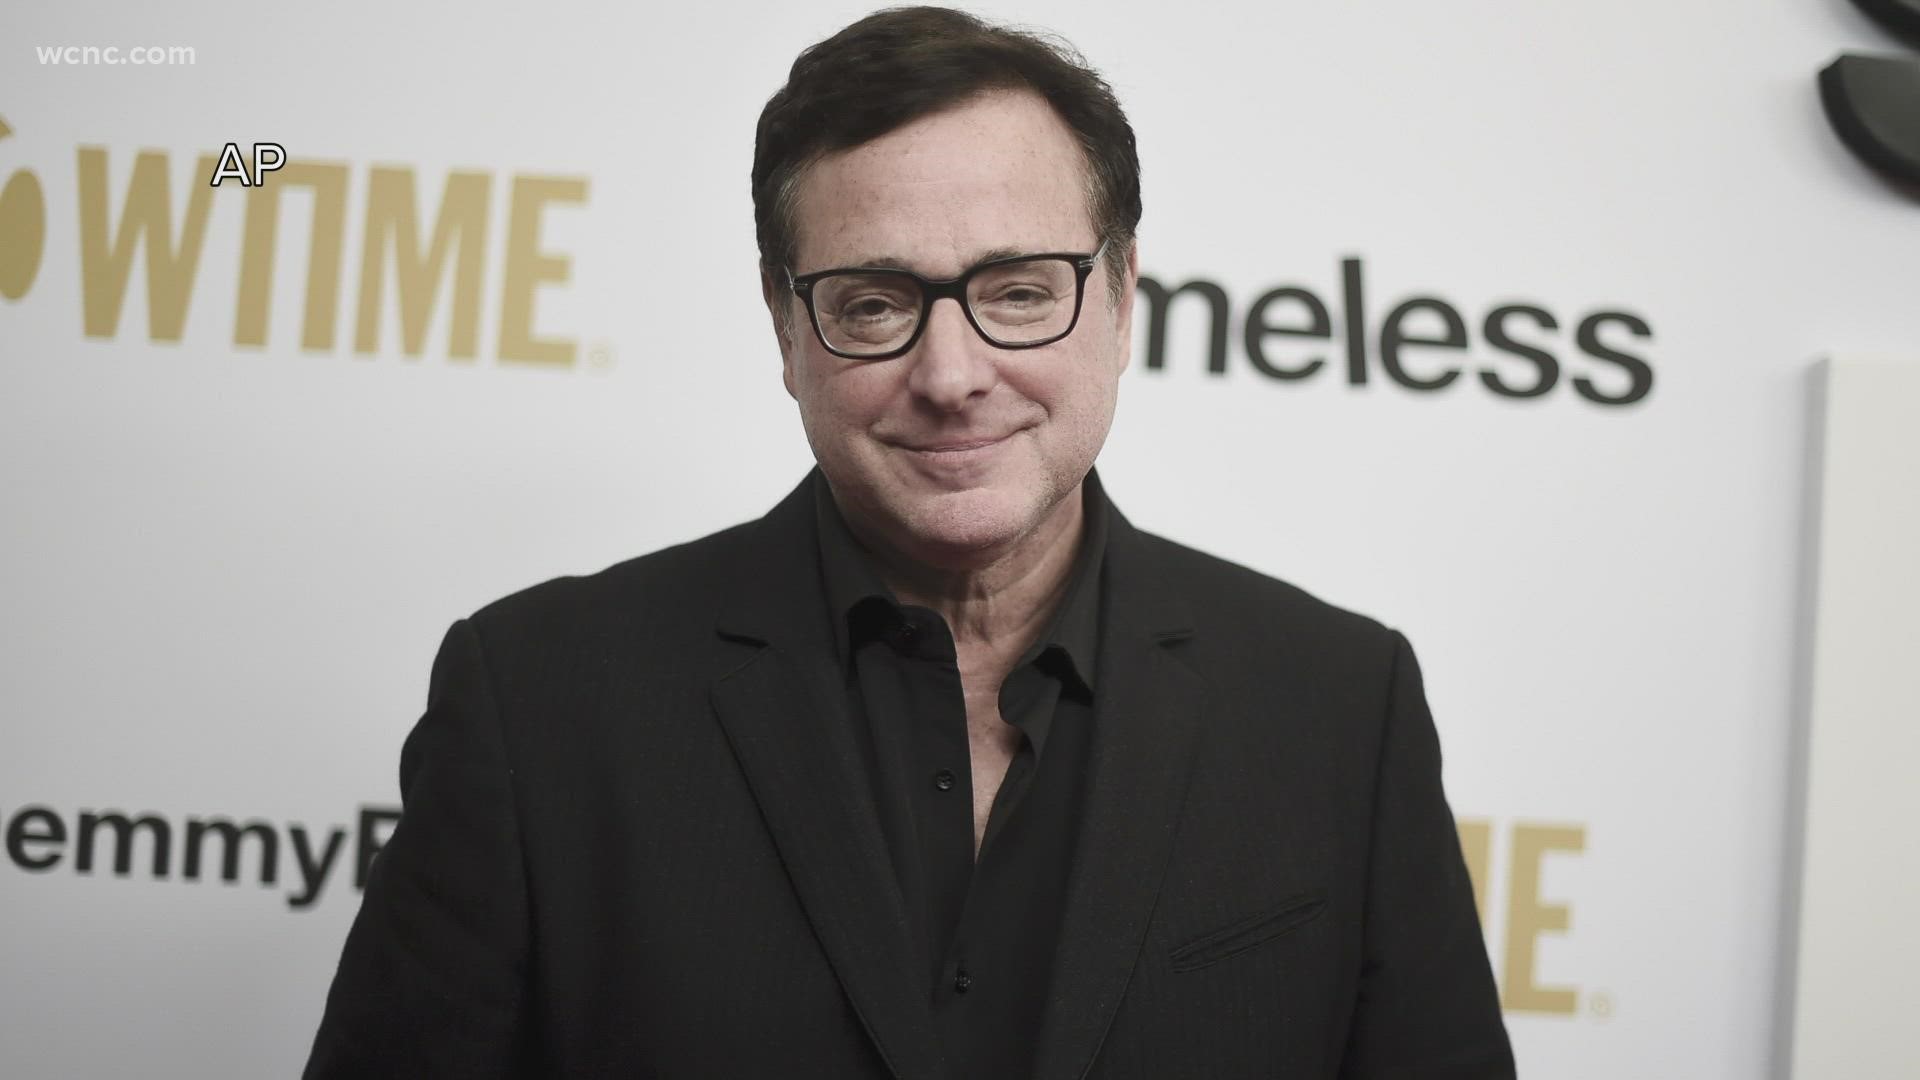 Bob Saget was best known by most for his role as Danny Tanner on 'Full House'. But friends and co-stars are also remembering him for his off-camera kindness.